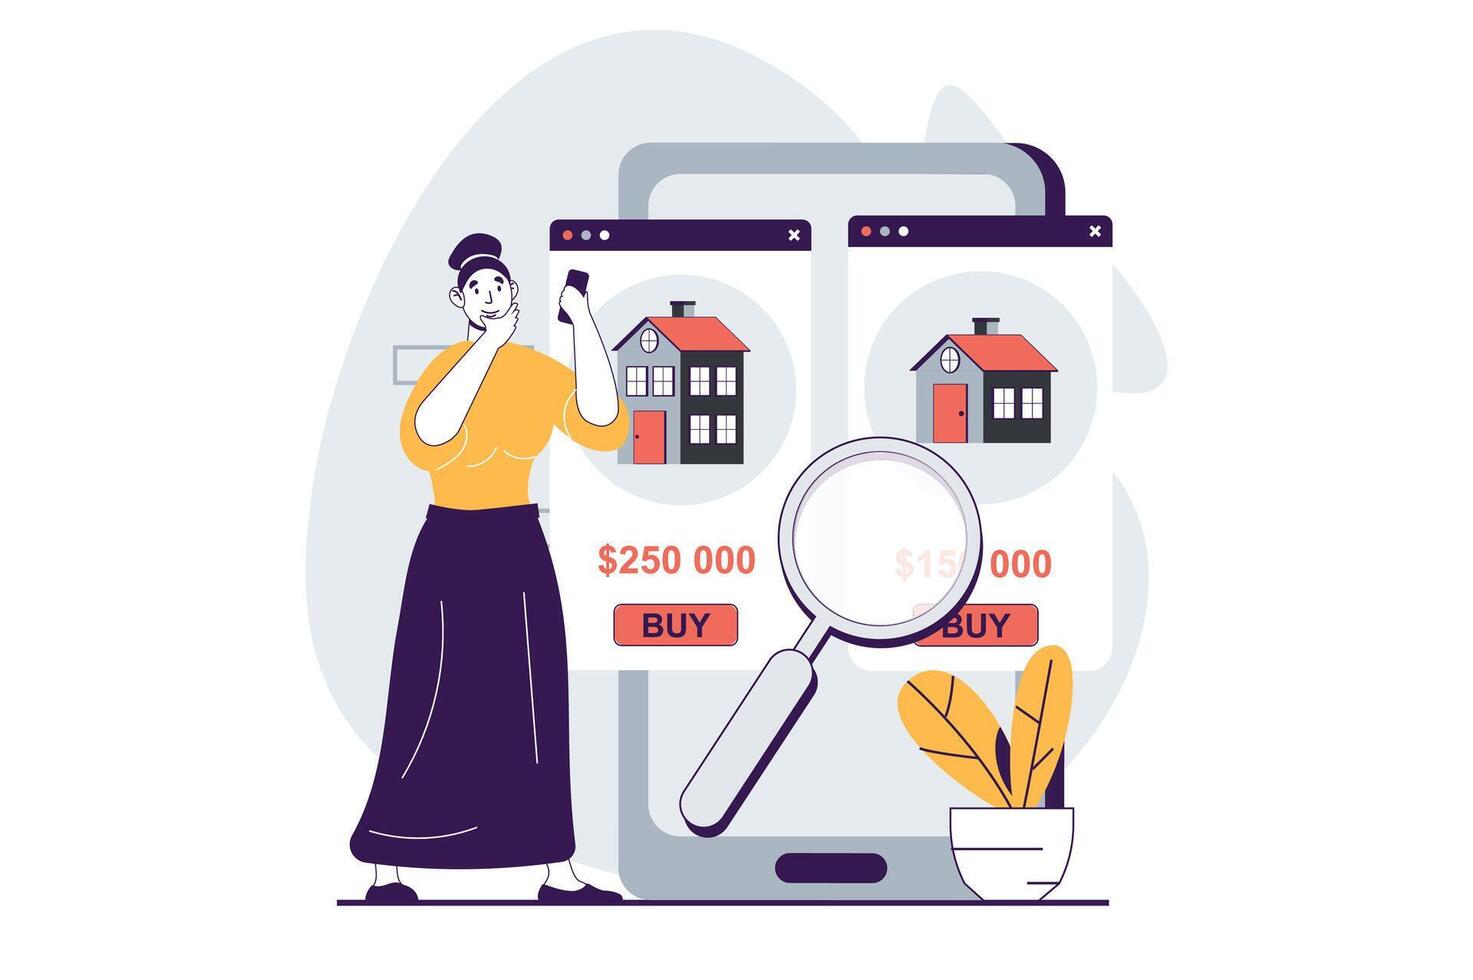 Real estate concept with people scene in flat design for web. Woman searching houses and selecting with bargain price at webpage. Vector illustration for social media banner, marketing material.